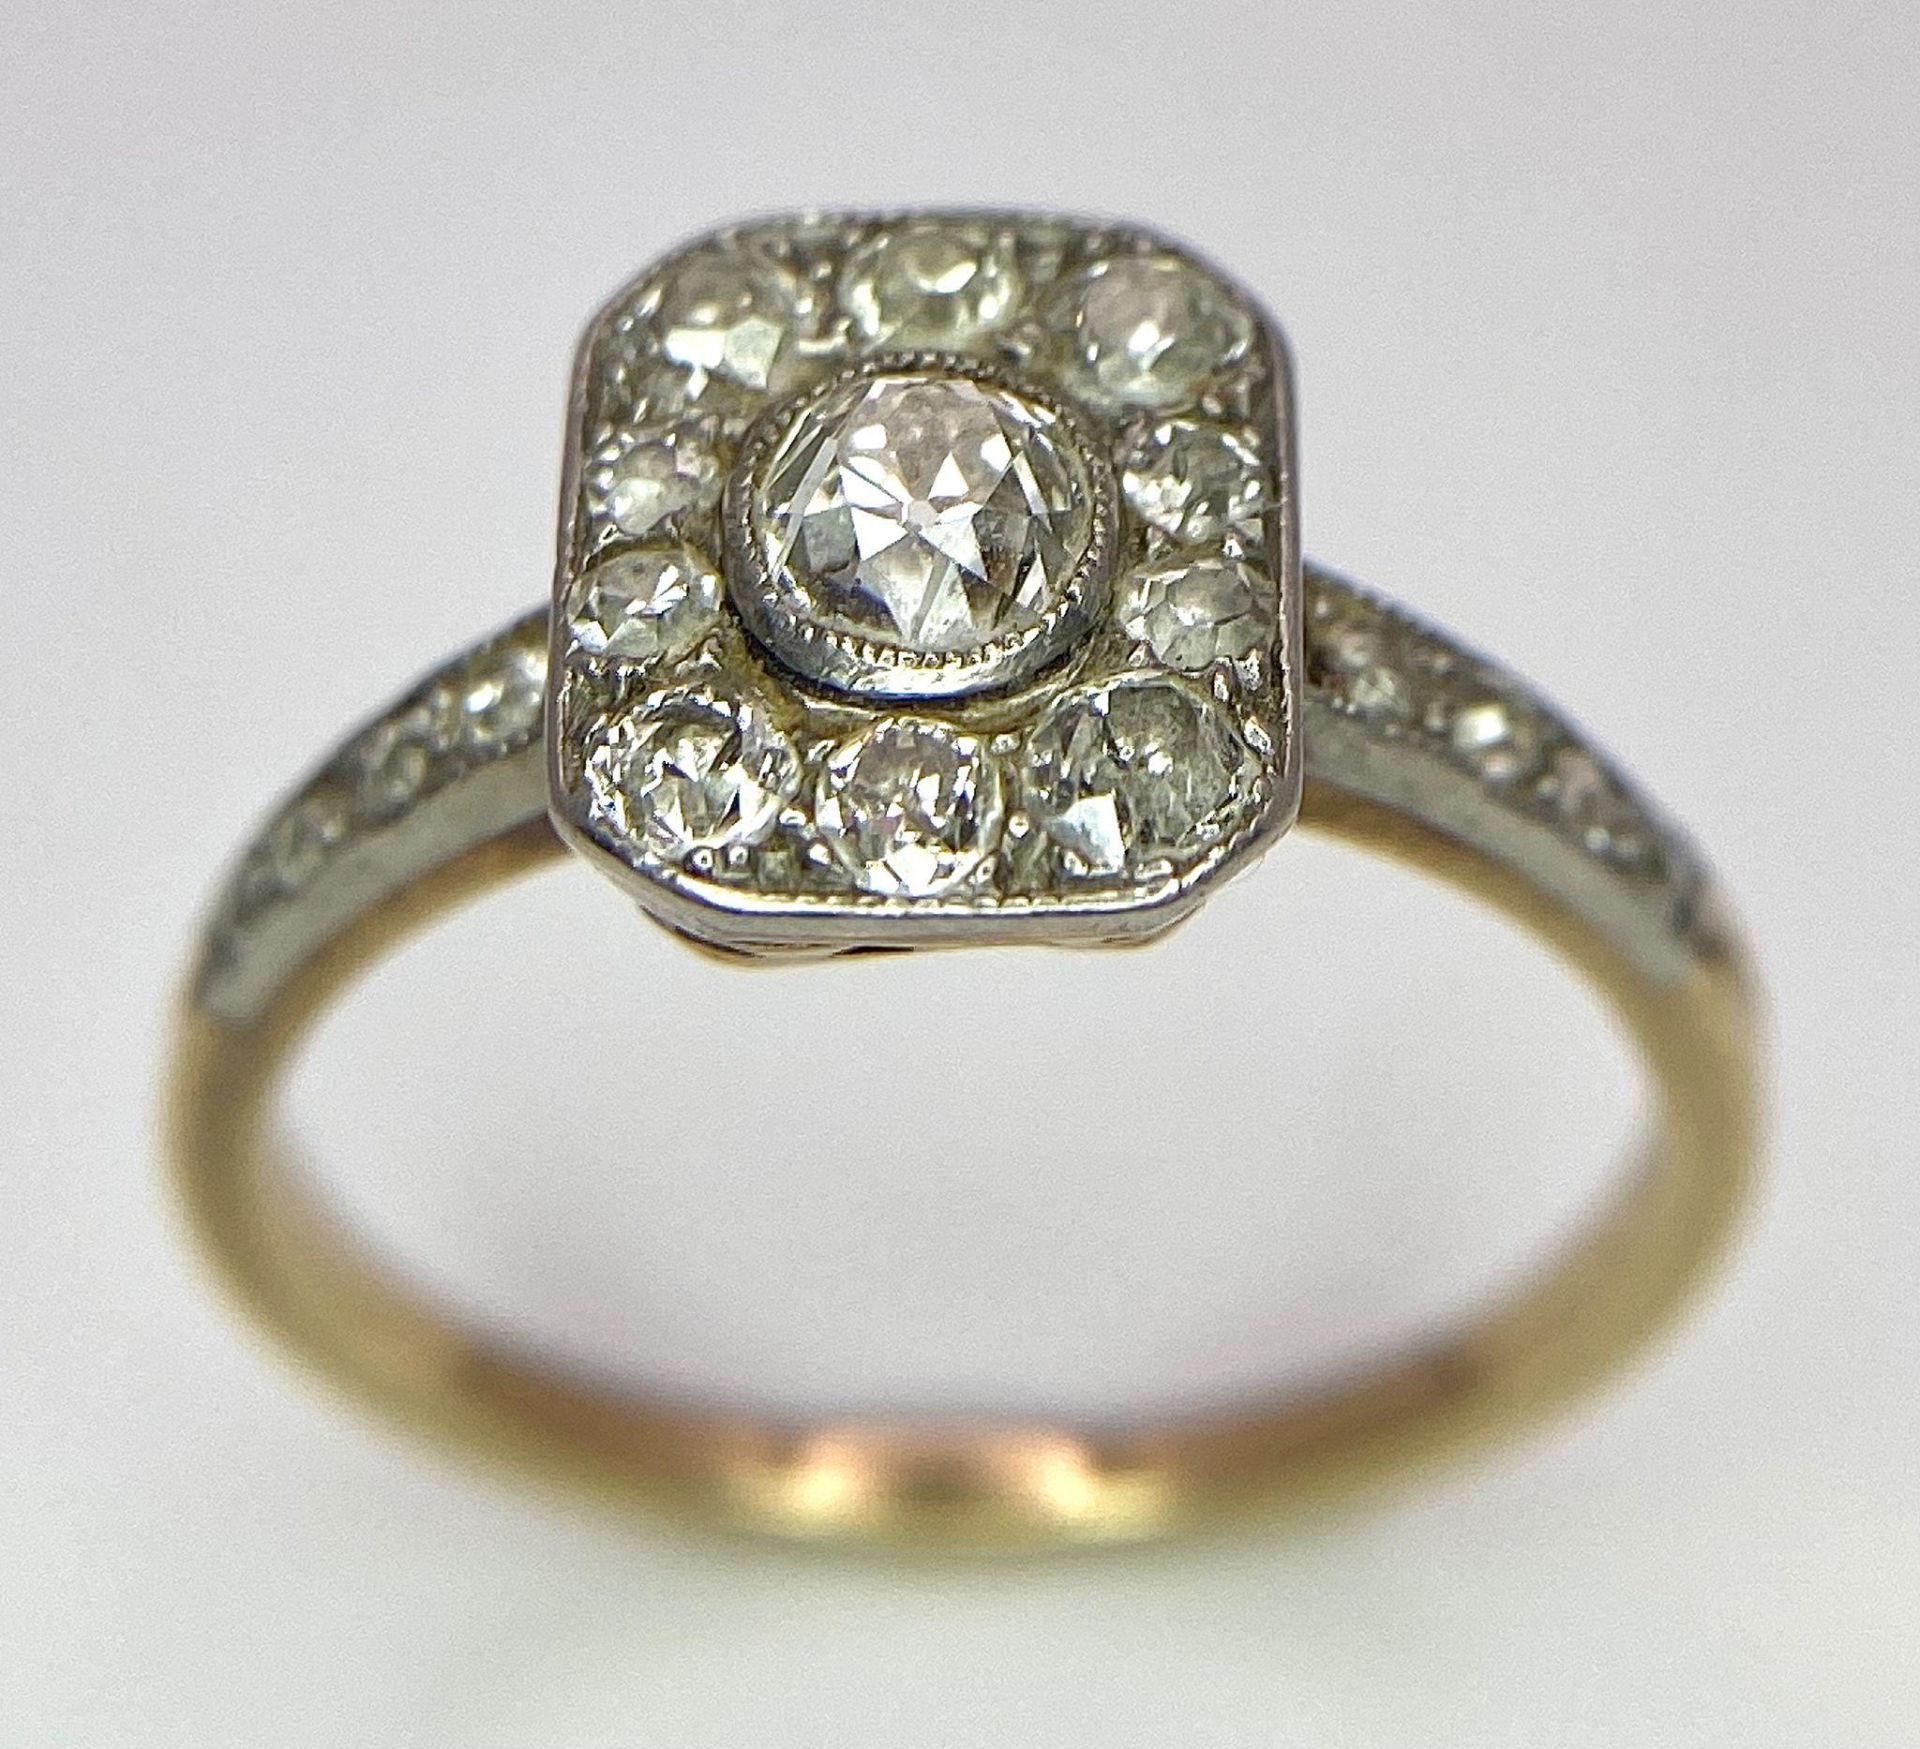 A 9 K yellow gold ring with an ART DECO style diamond cluster and more diamonds on the shoulders, - Image 5 of 8